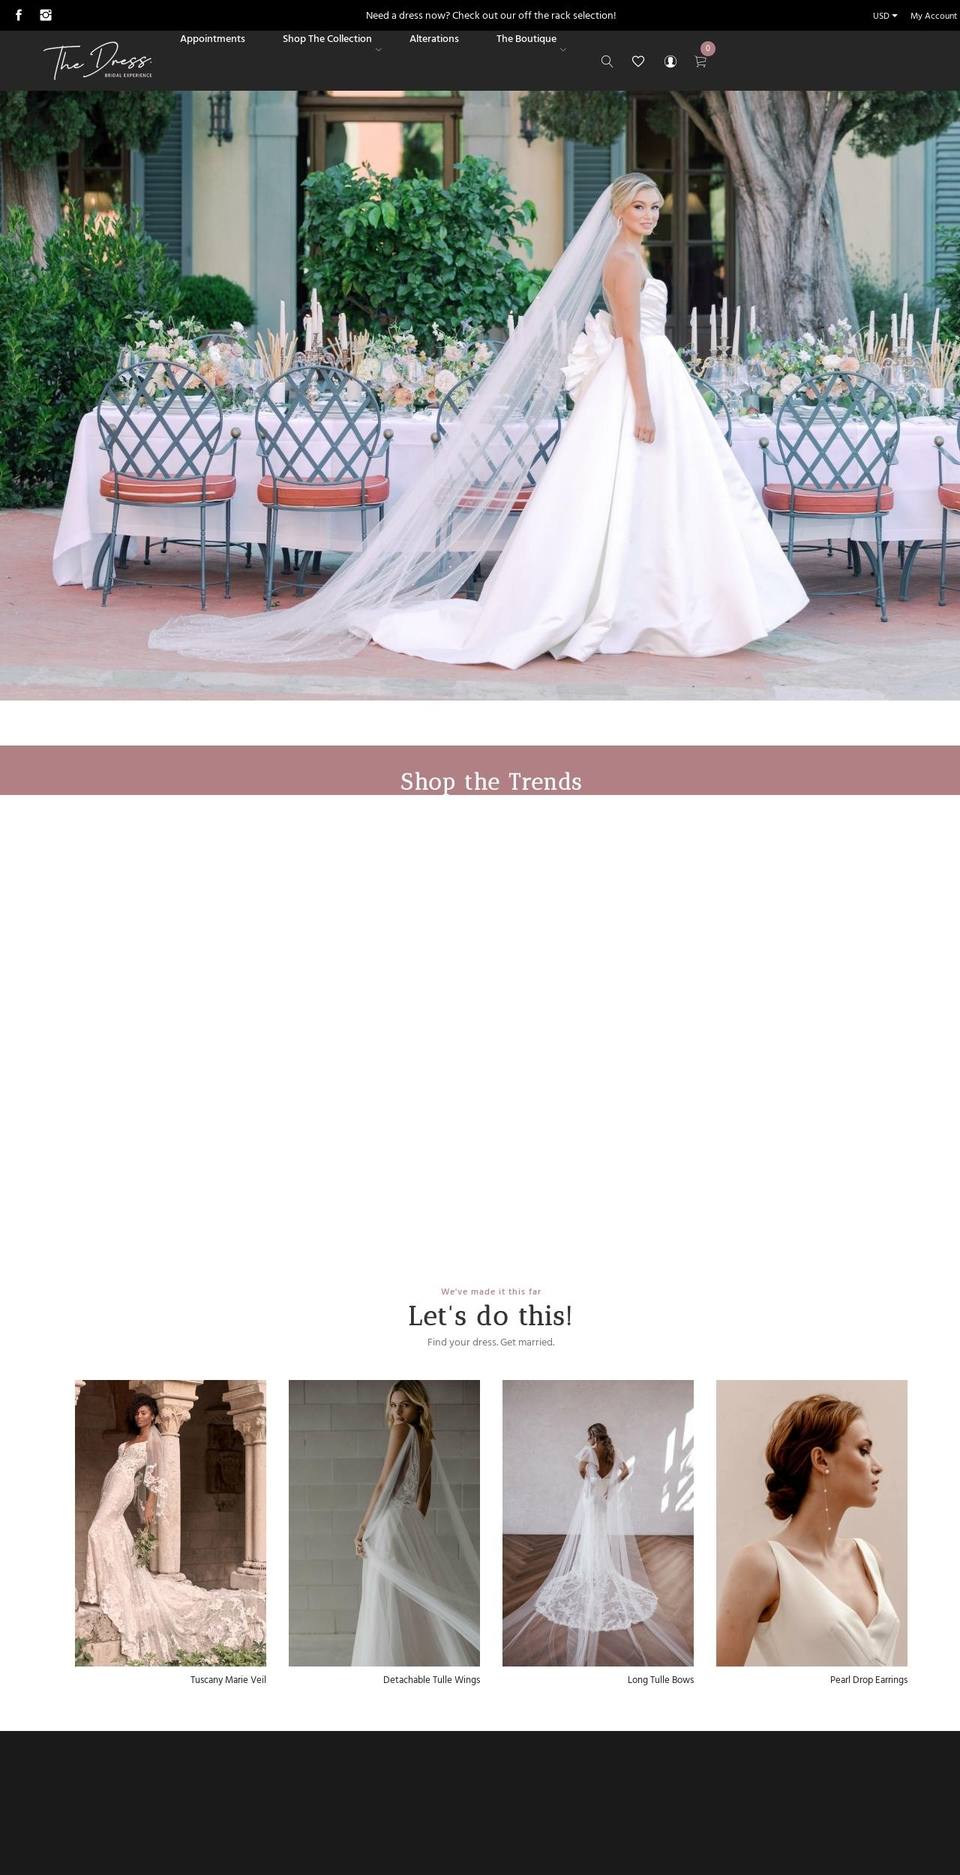 aries Shopify theme site example thedressbride.com